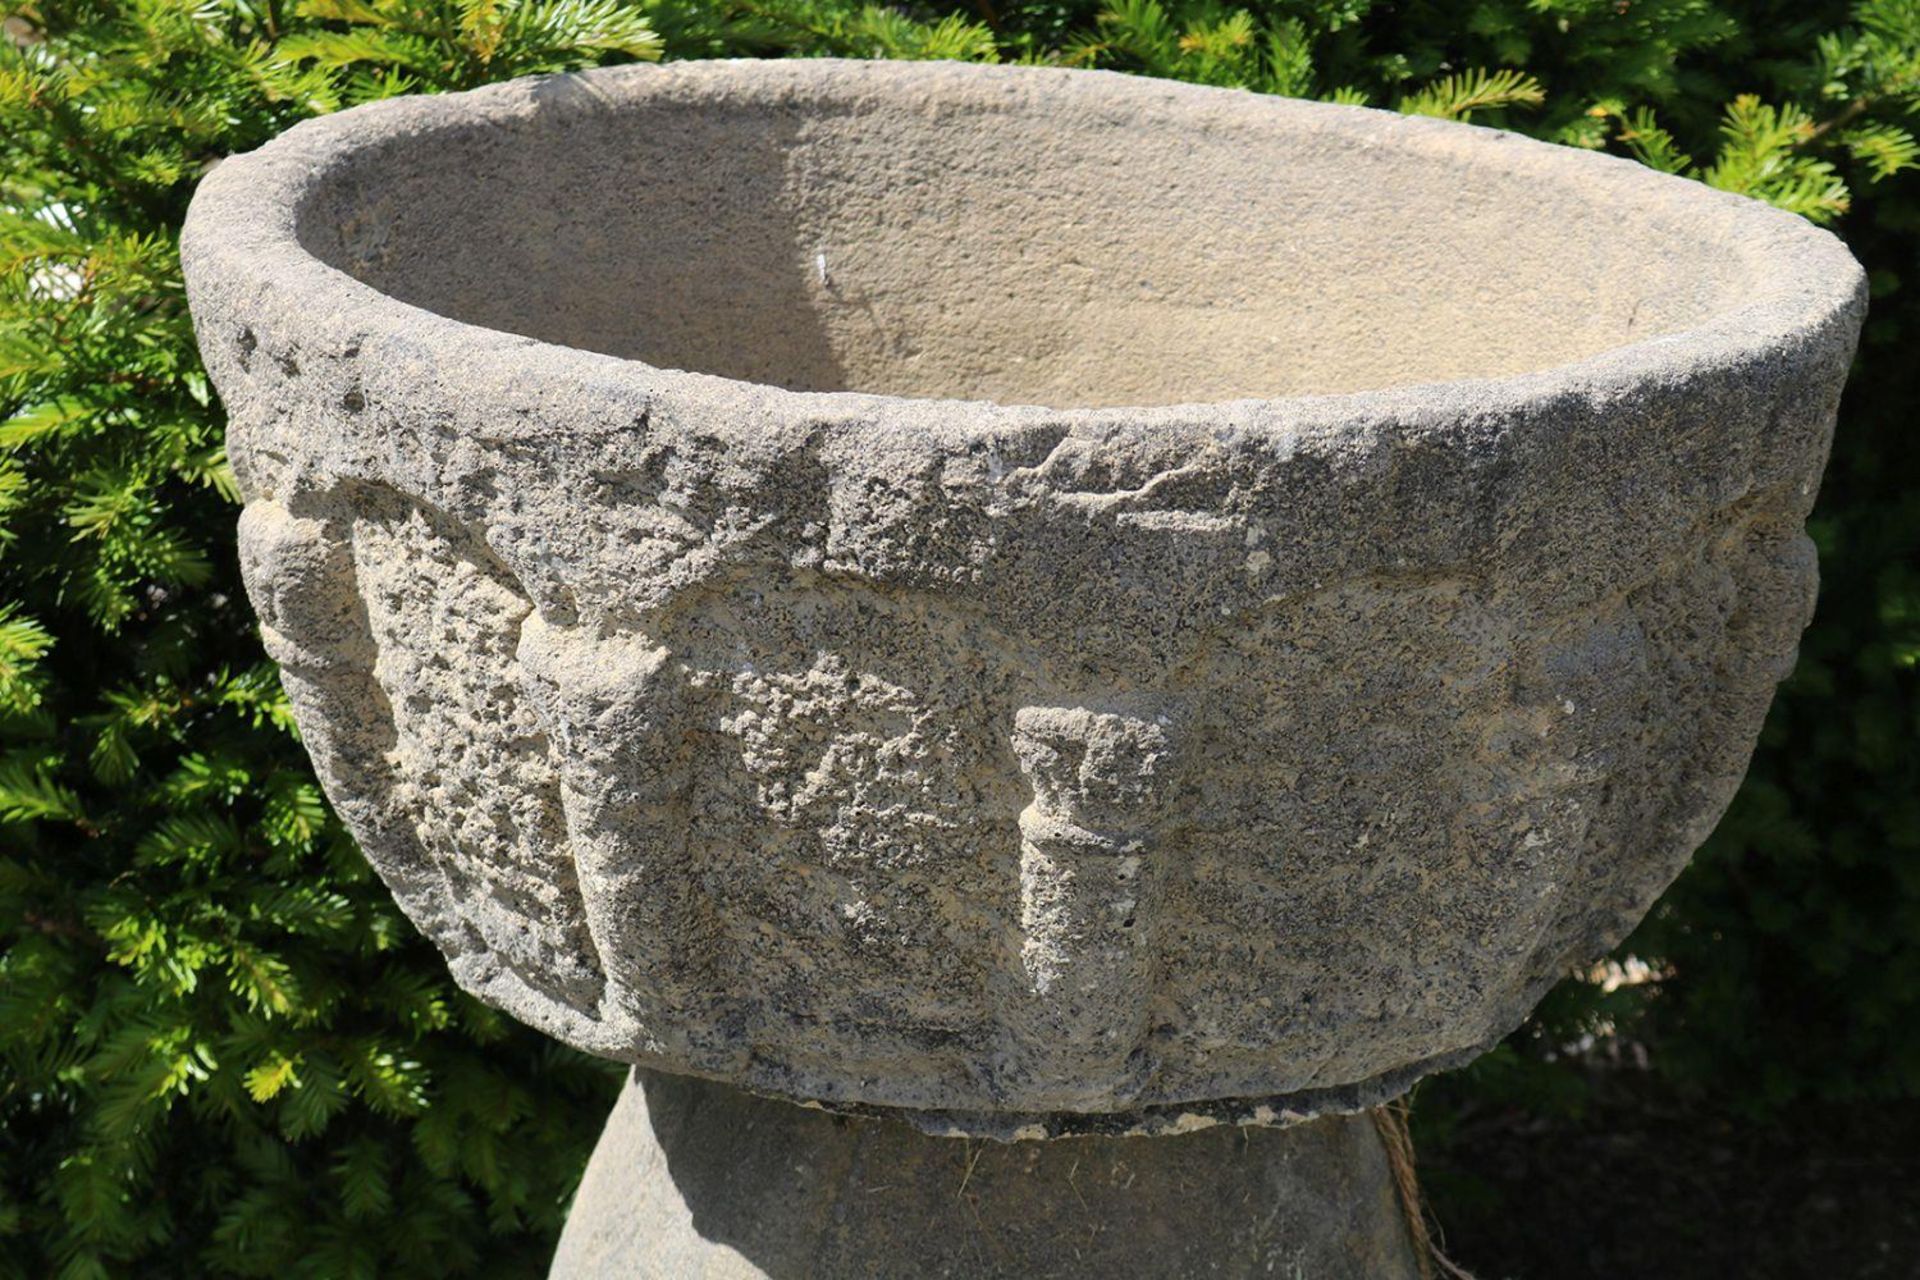 MOULDED STONE MEDIEVAL STYLE URN - Image 2 of 2